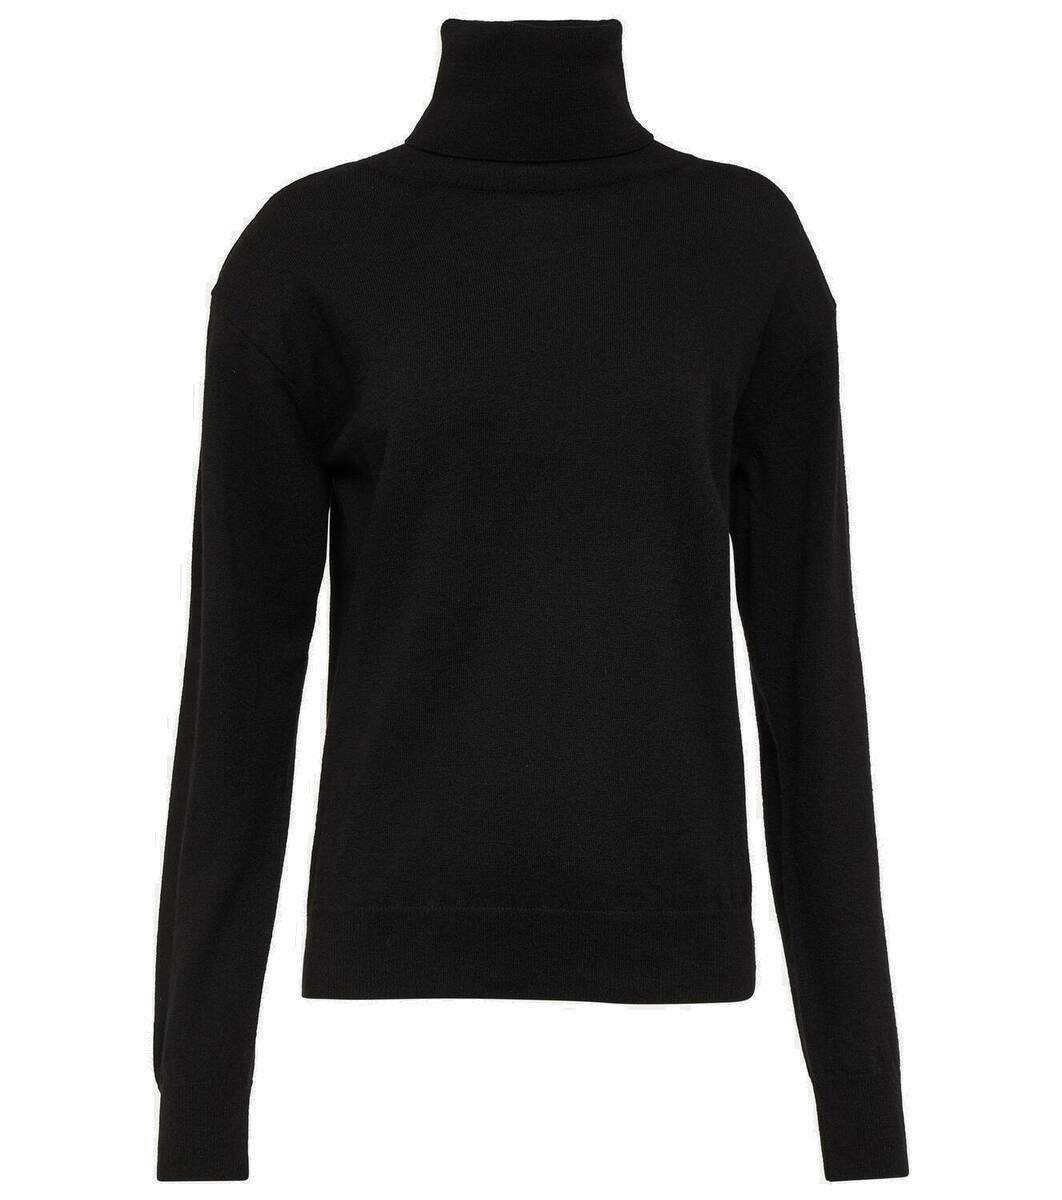 The Frankie Shop Ines wool turtleneck sweater The Frankie Shop